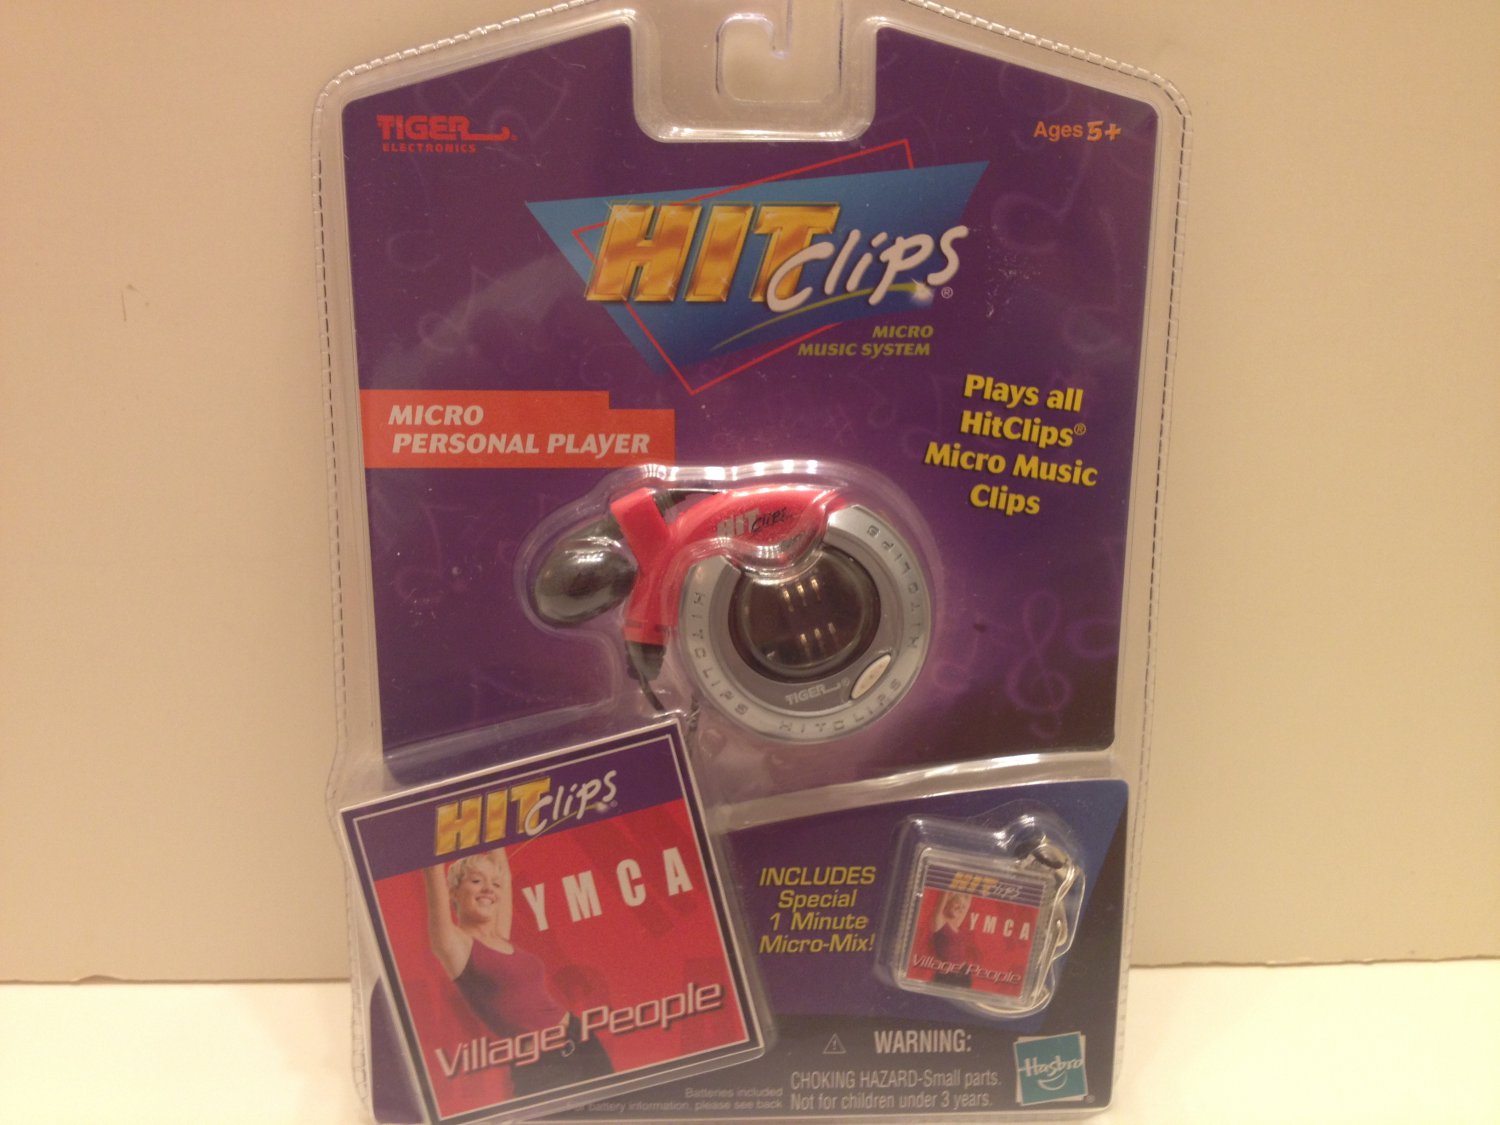 Hit Clips Village People YMCA Micro Music Clip